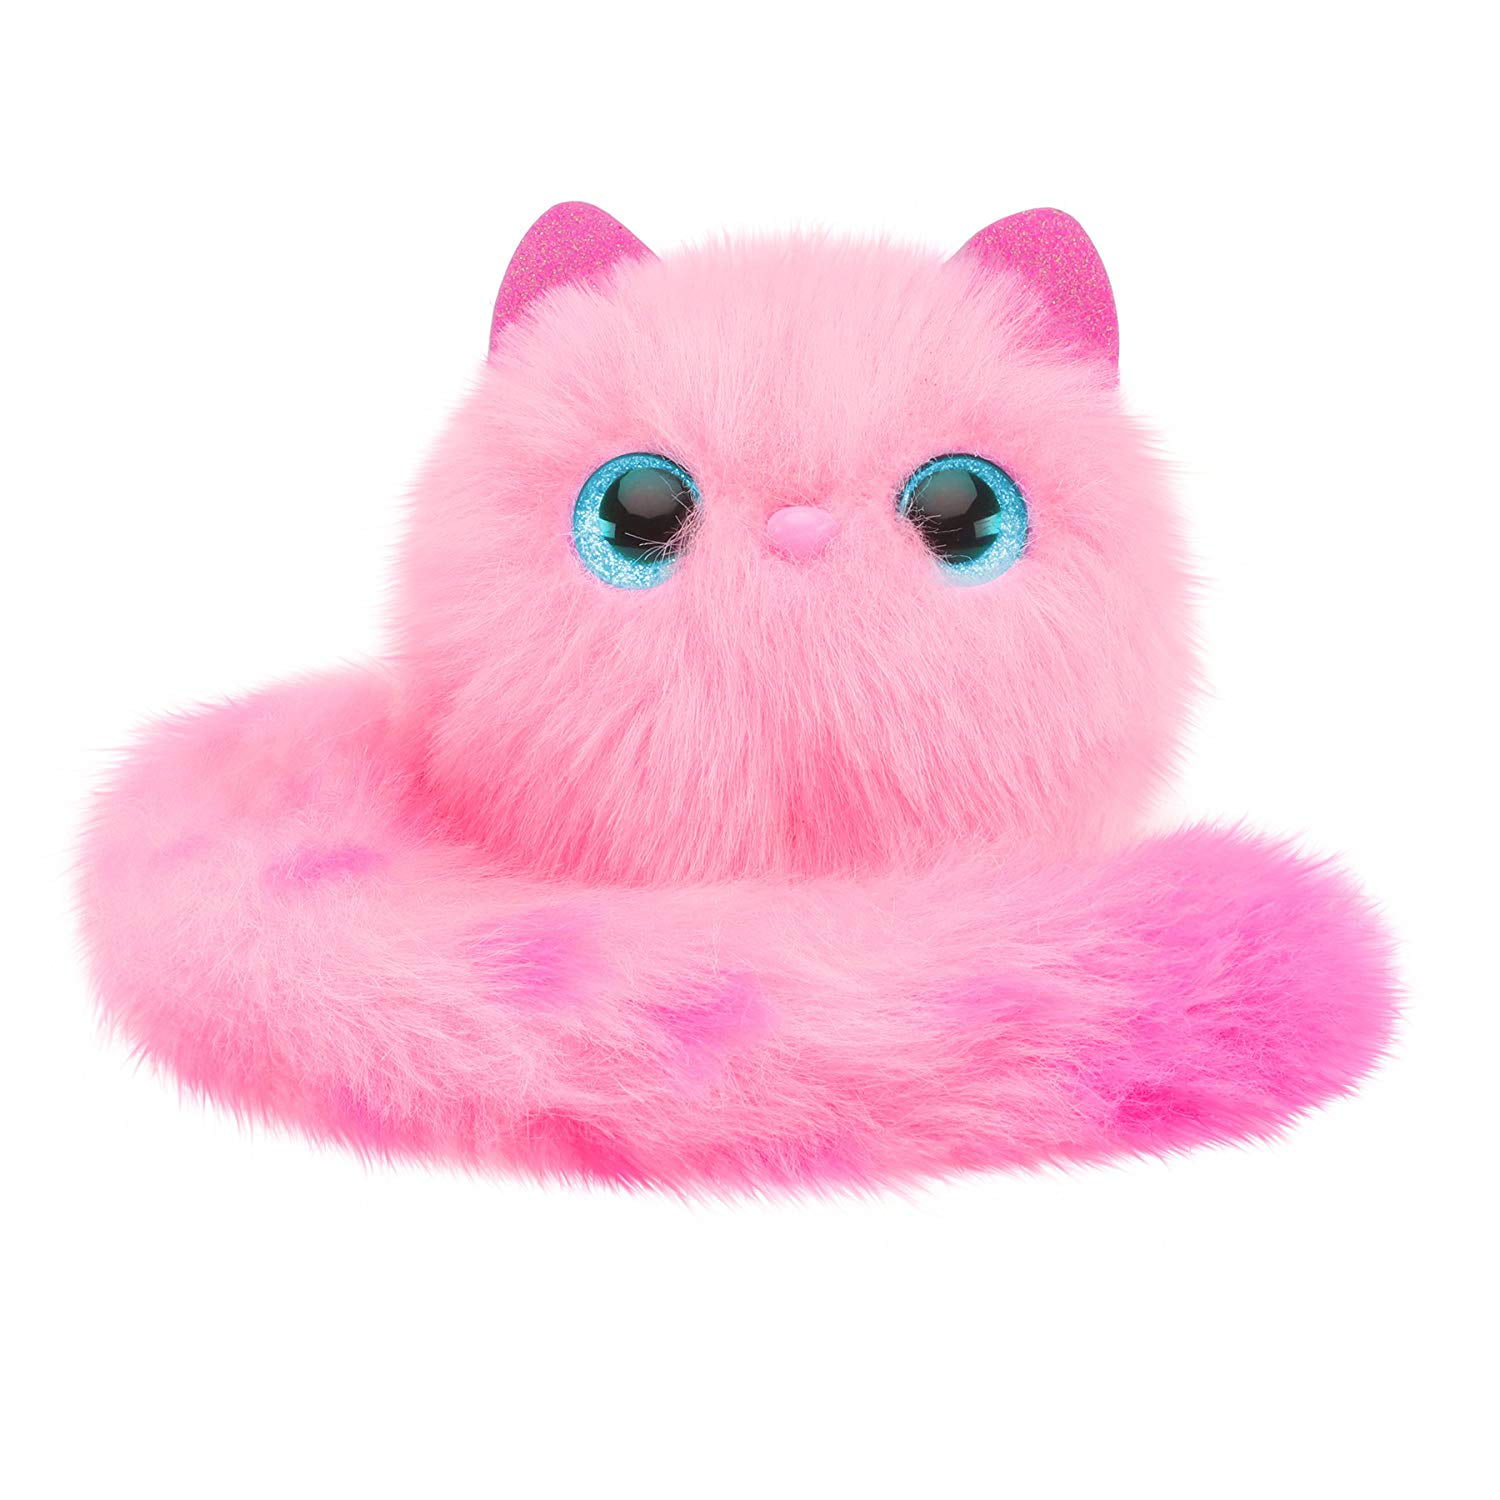 BLOSSOM POMSIES Pink PLUSH WEARABLE PET CAT with Light Up Eyes & Sounds REAL 